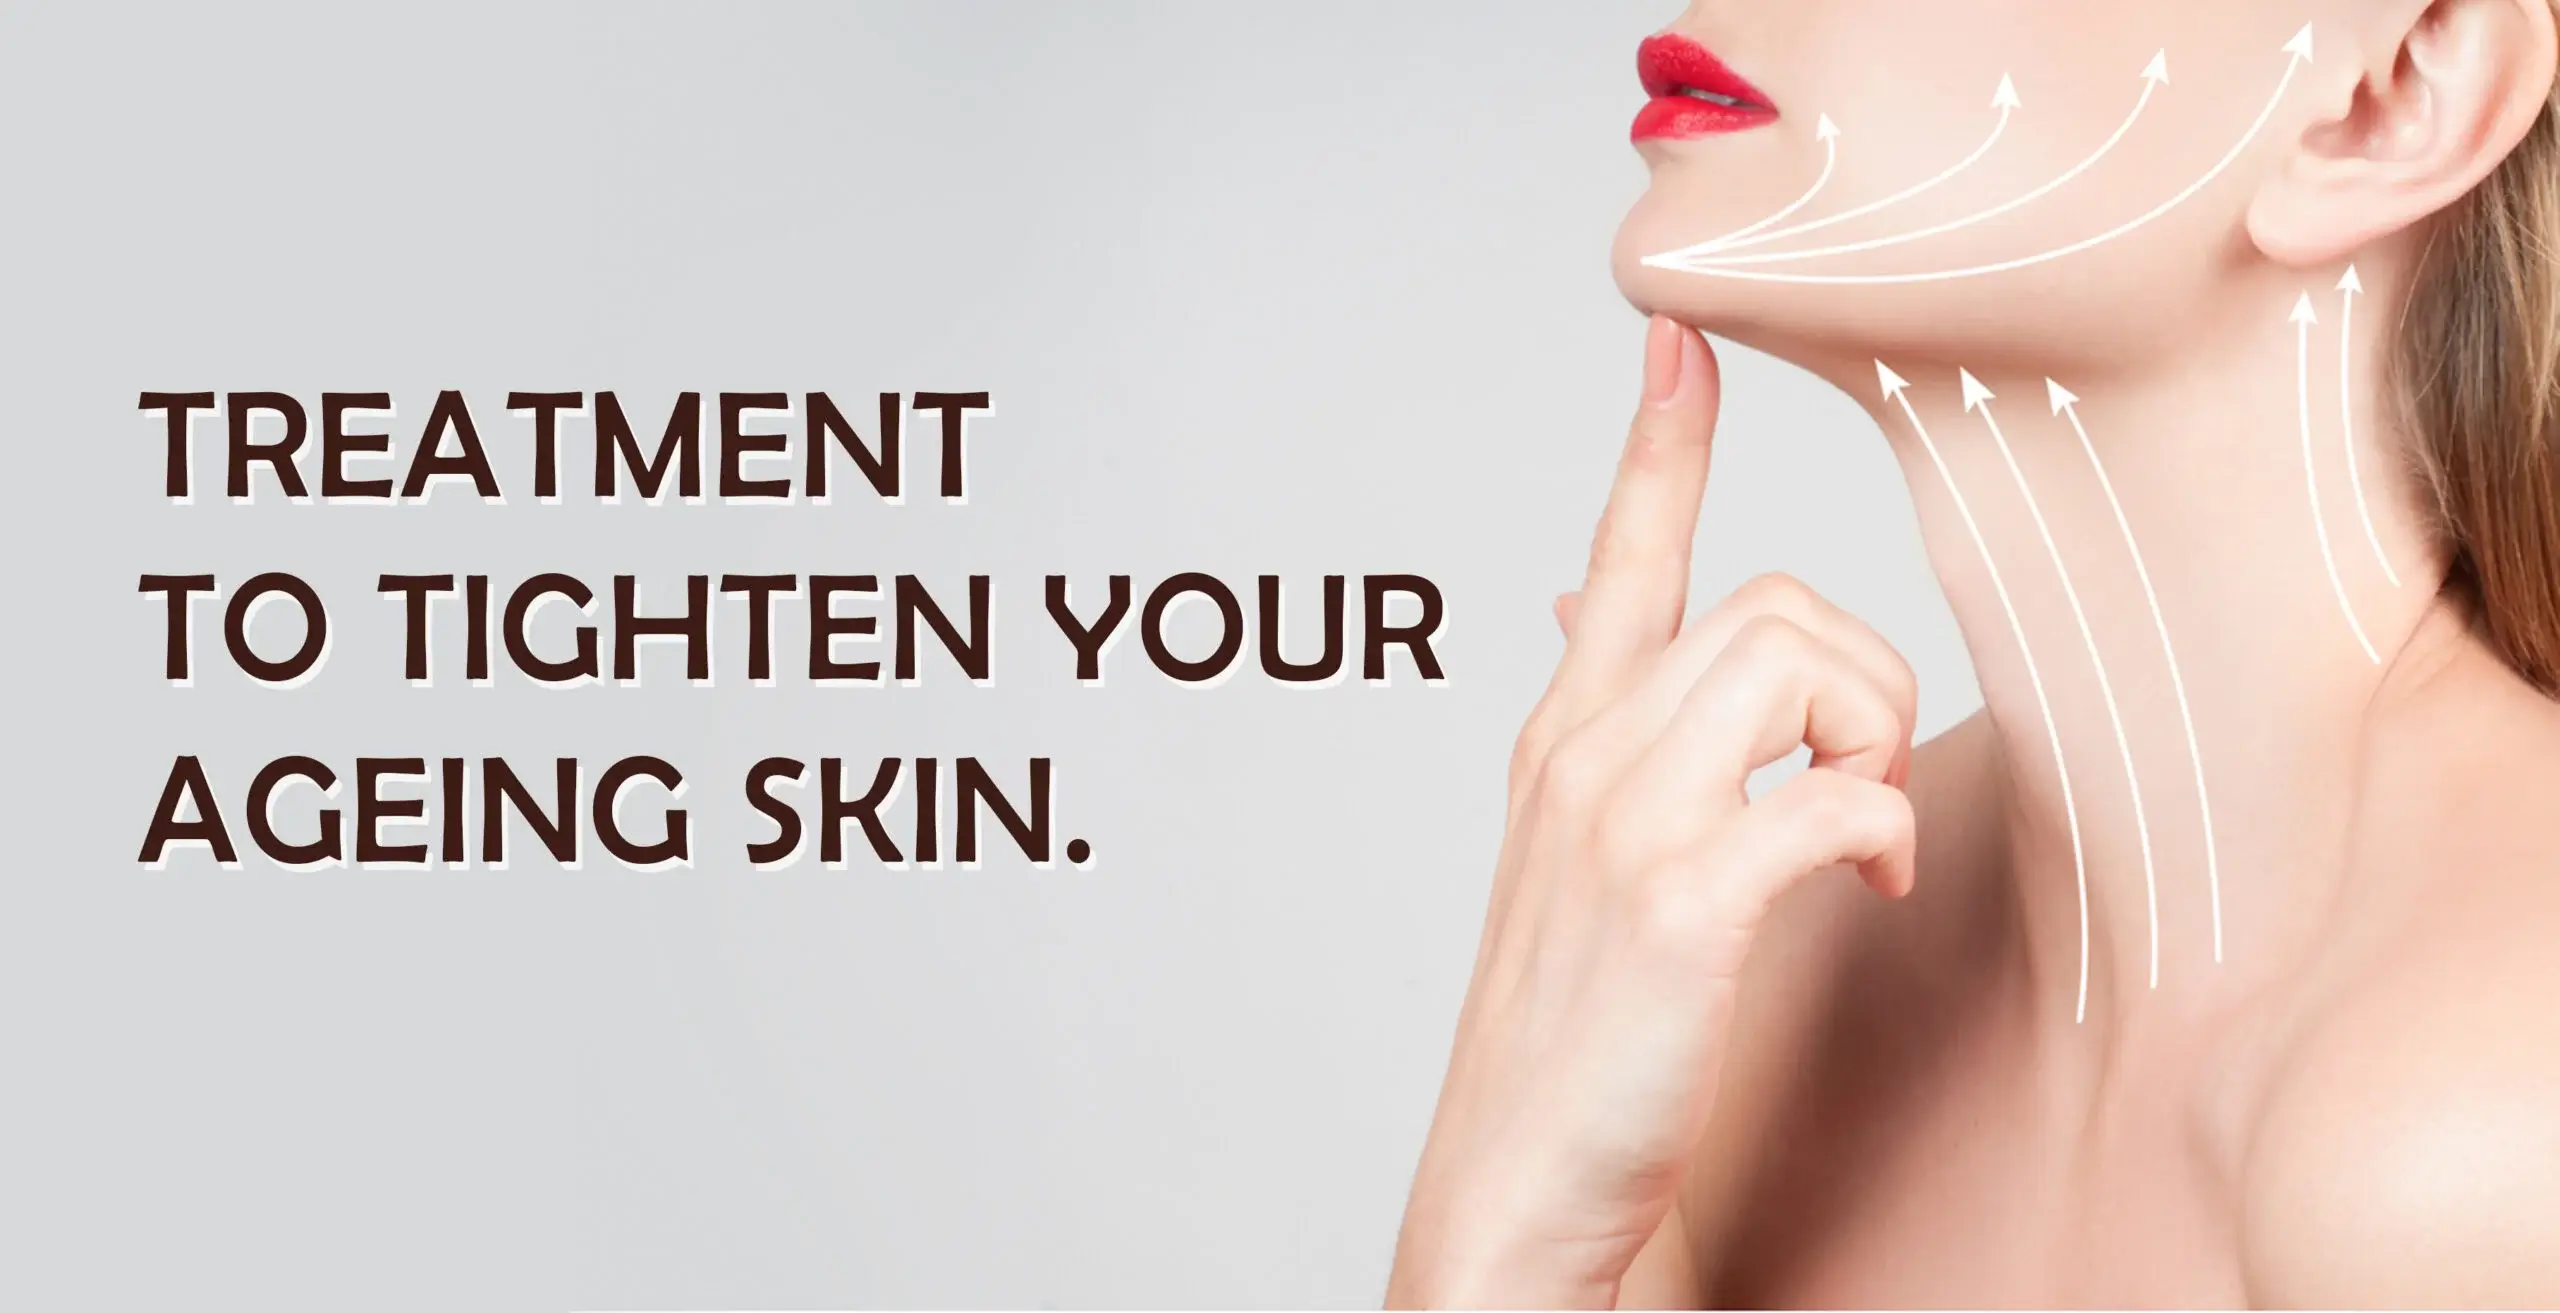 https://www.miracleshealth.com/assets/blog/assets/uploads/blog/Treatment to Tighten your ageing skin